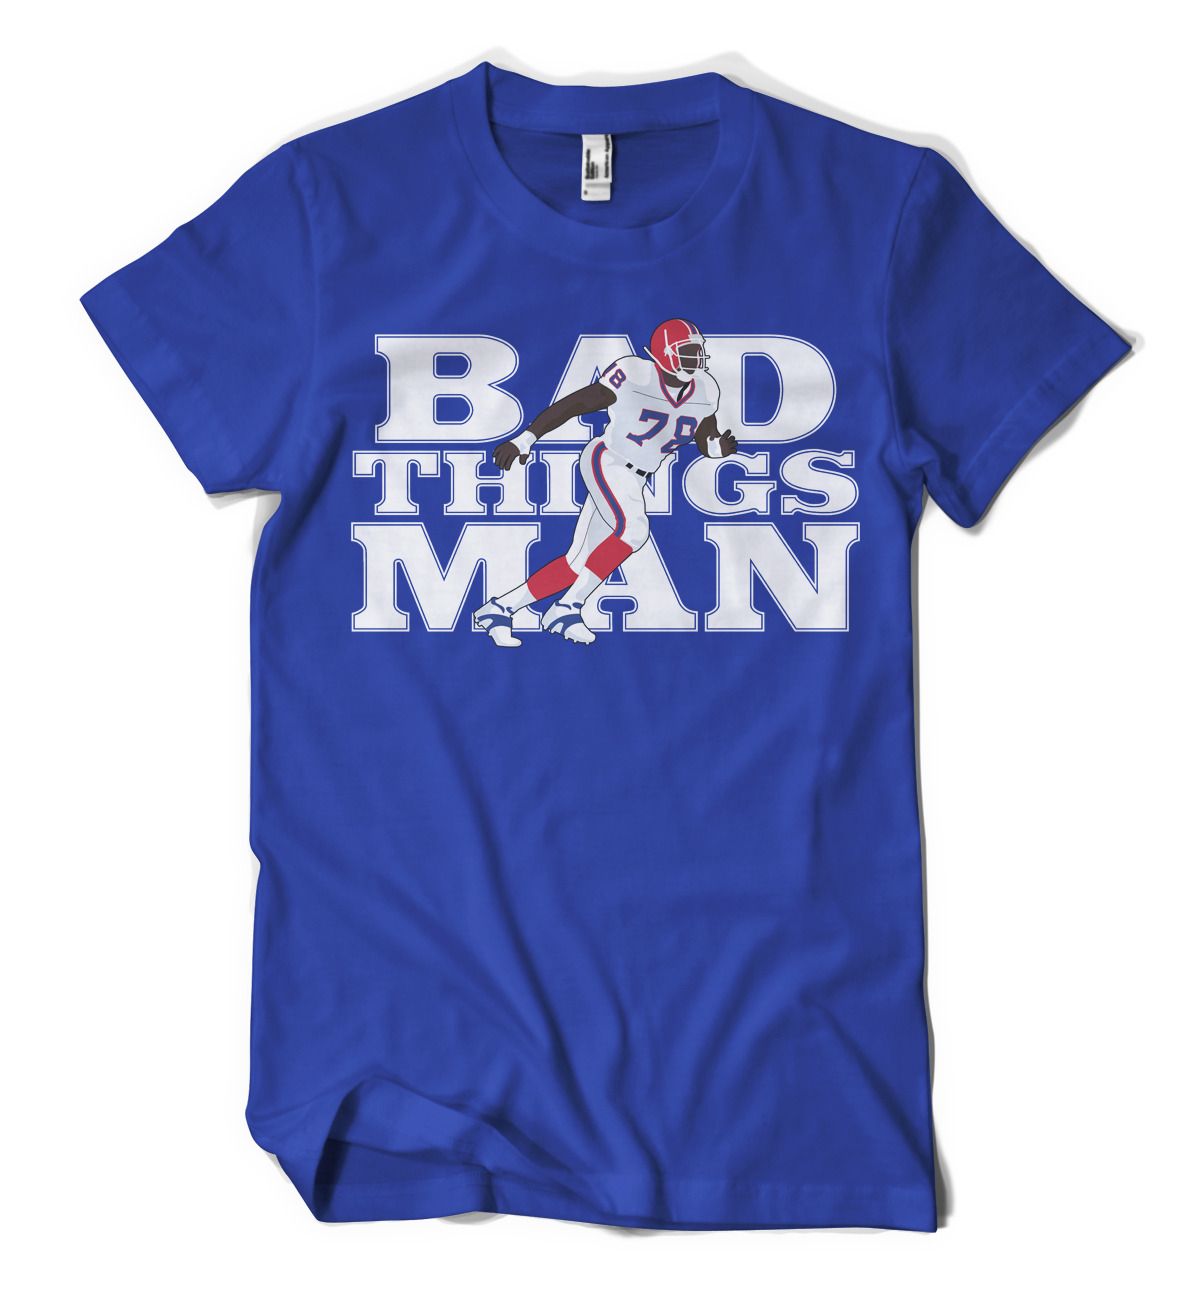 Bad Things Man - Bruce Smith, Buffalo Bills
Do you know what Bruce does in this shirt? Bad things, man. I mean bad things.